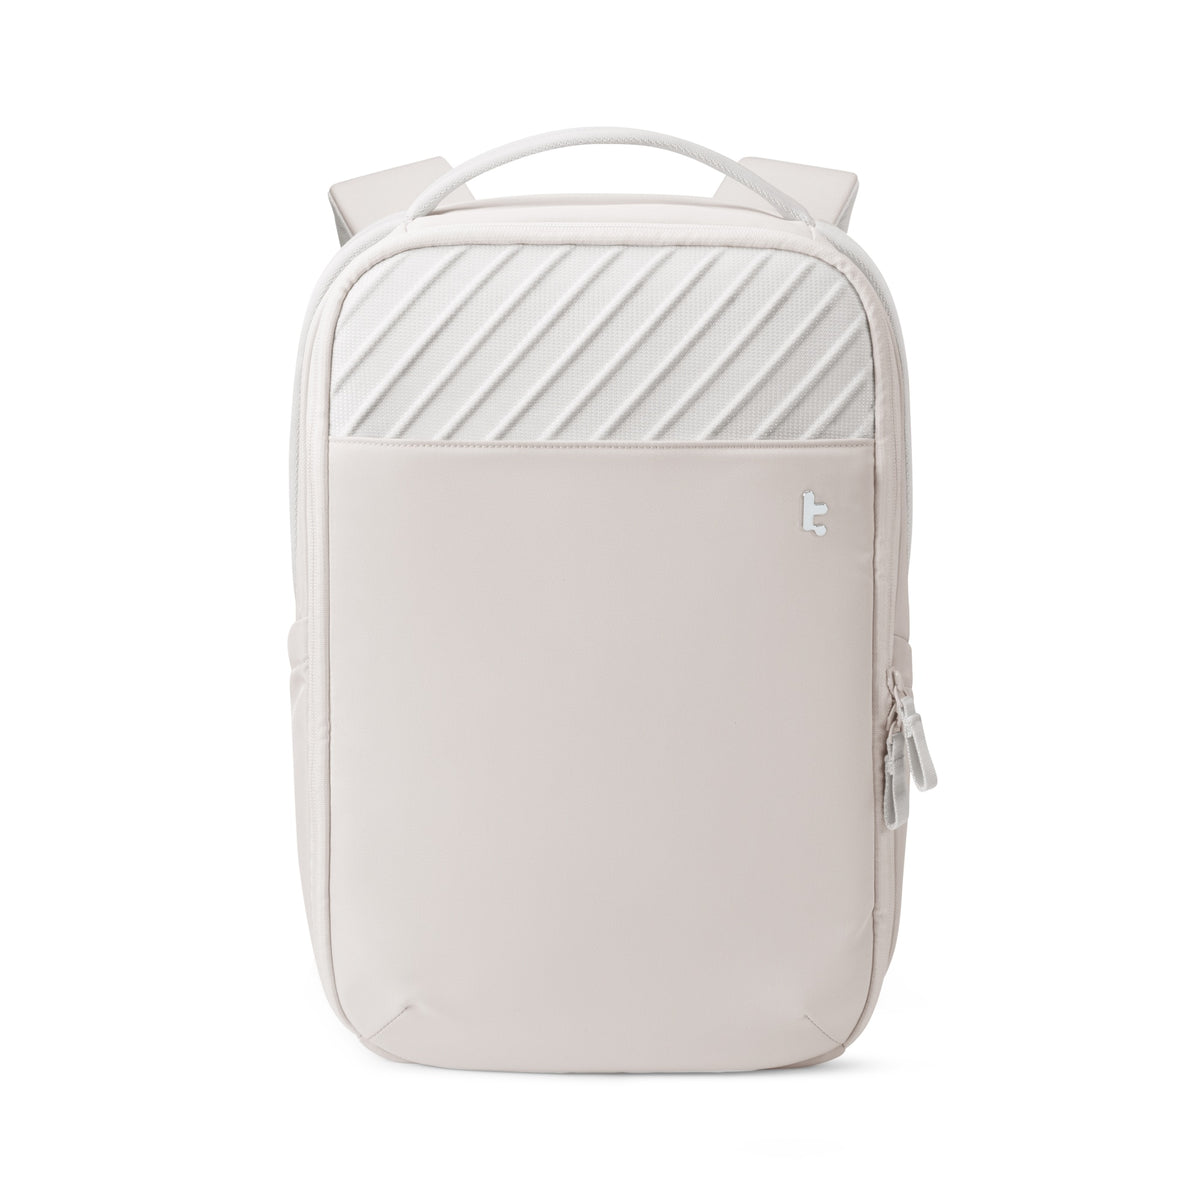 primary_Voyage-T50 Laptop Backpack 20L | White